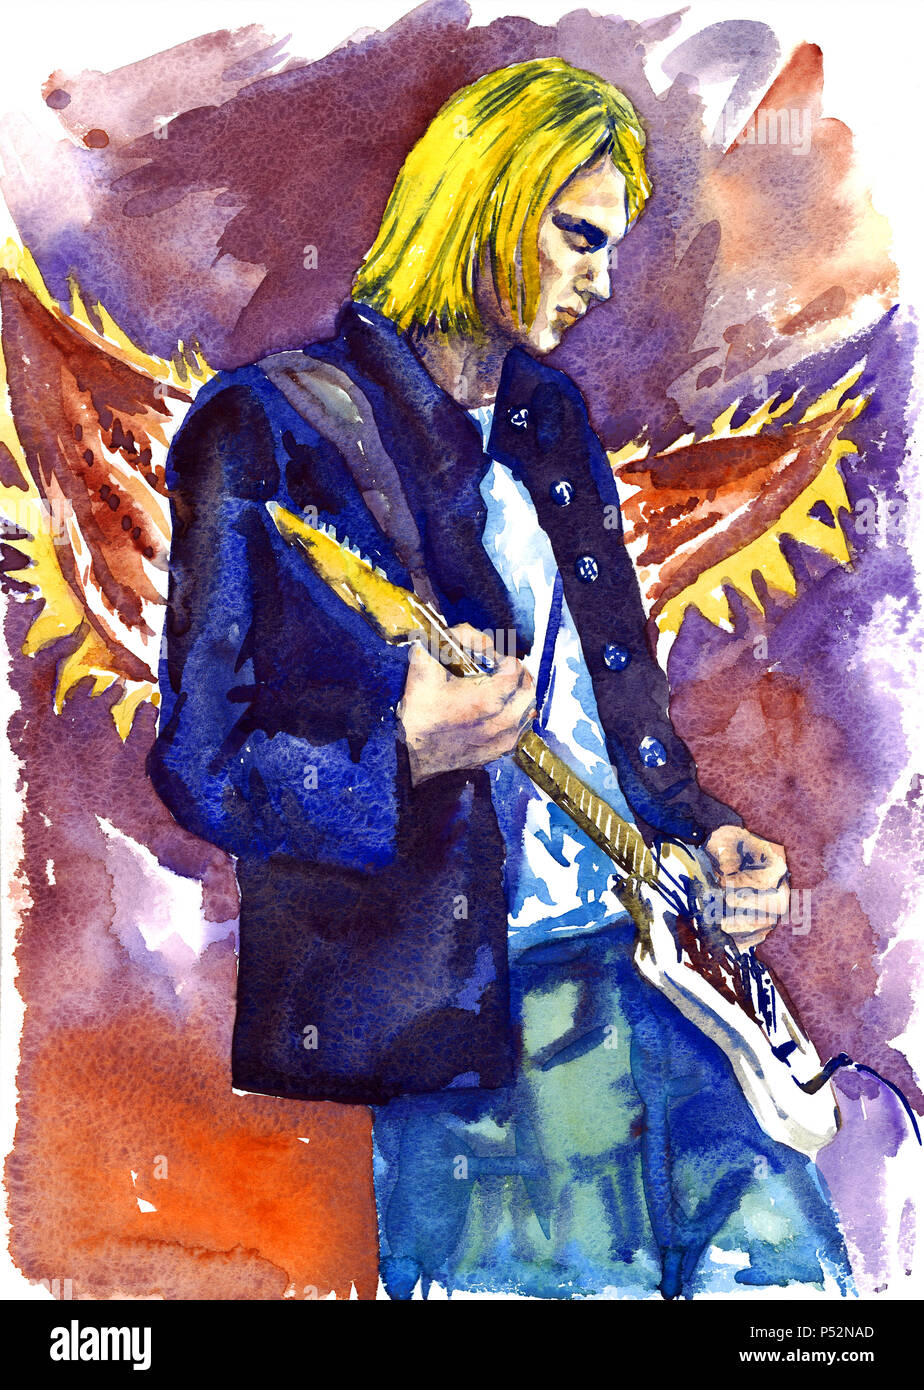 Illustration, painted watercolor inspired by Kurt Cobain, Nirvana leader with guitar on stage, angels wings background Stock Photo